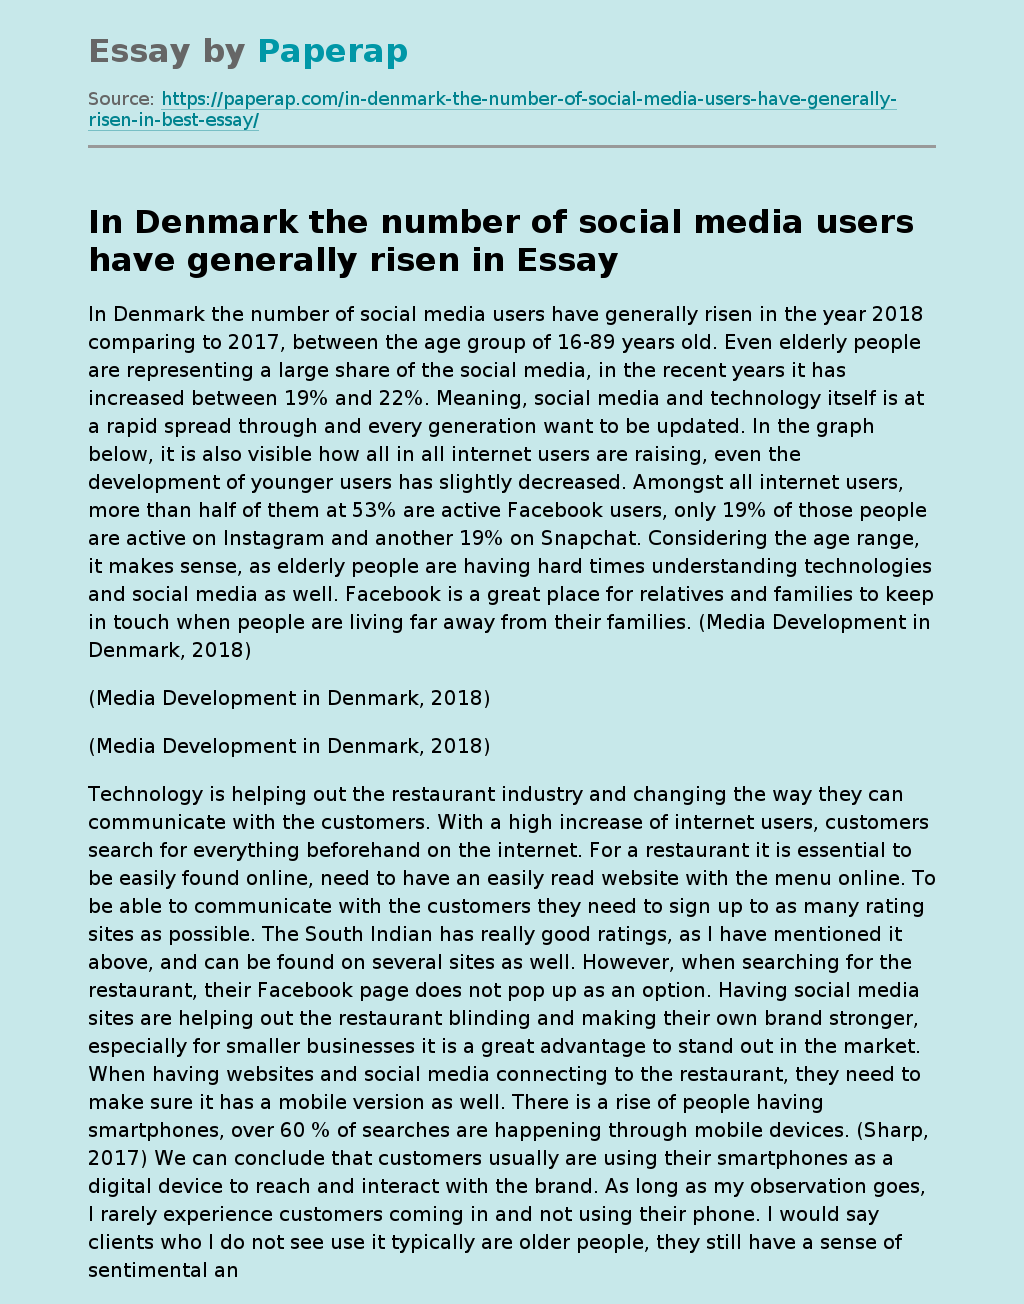 Social Media and Its Role